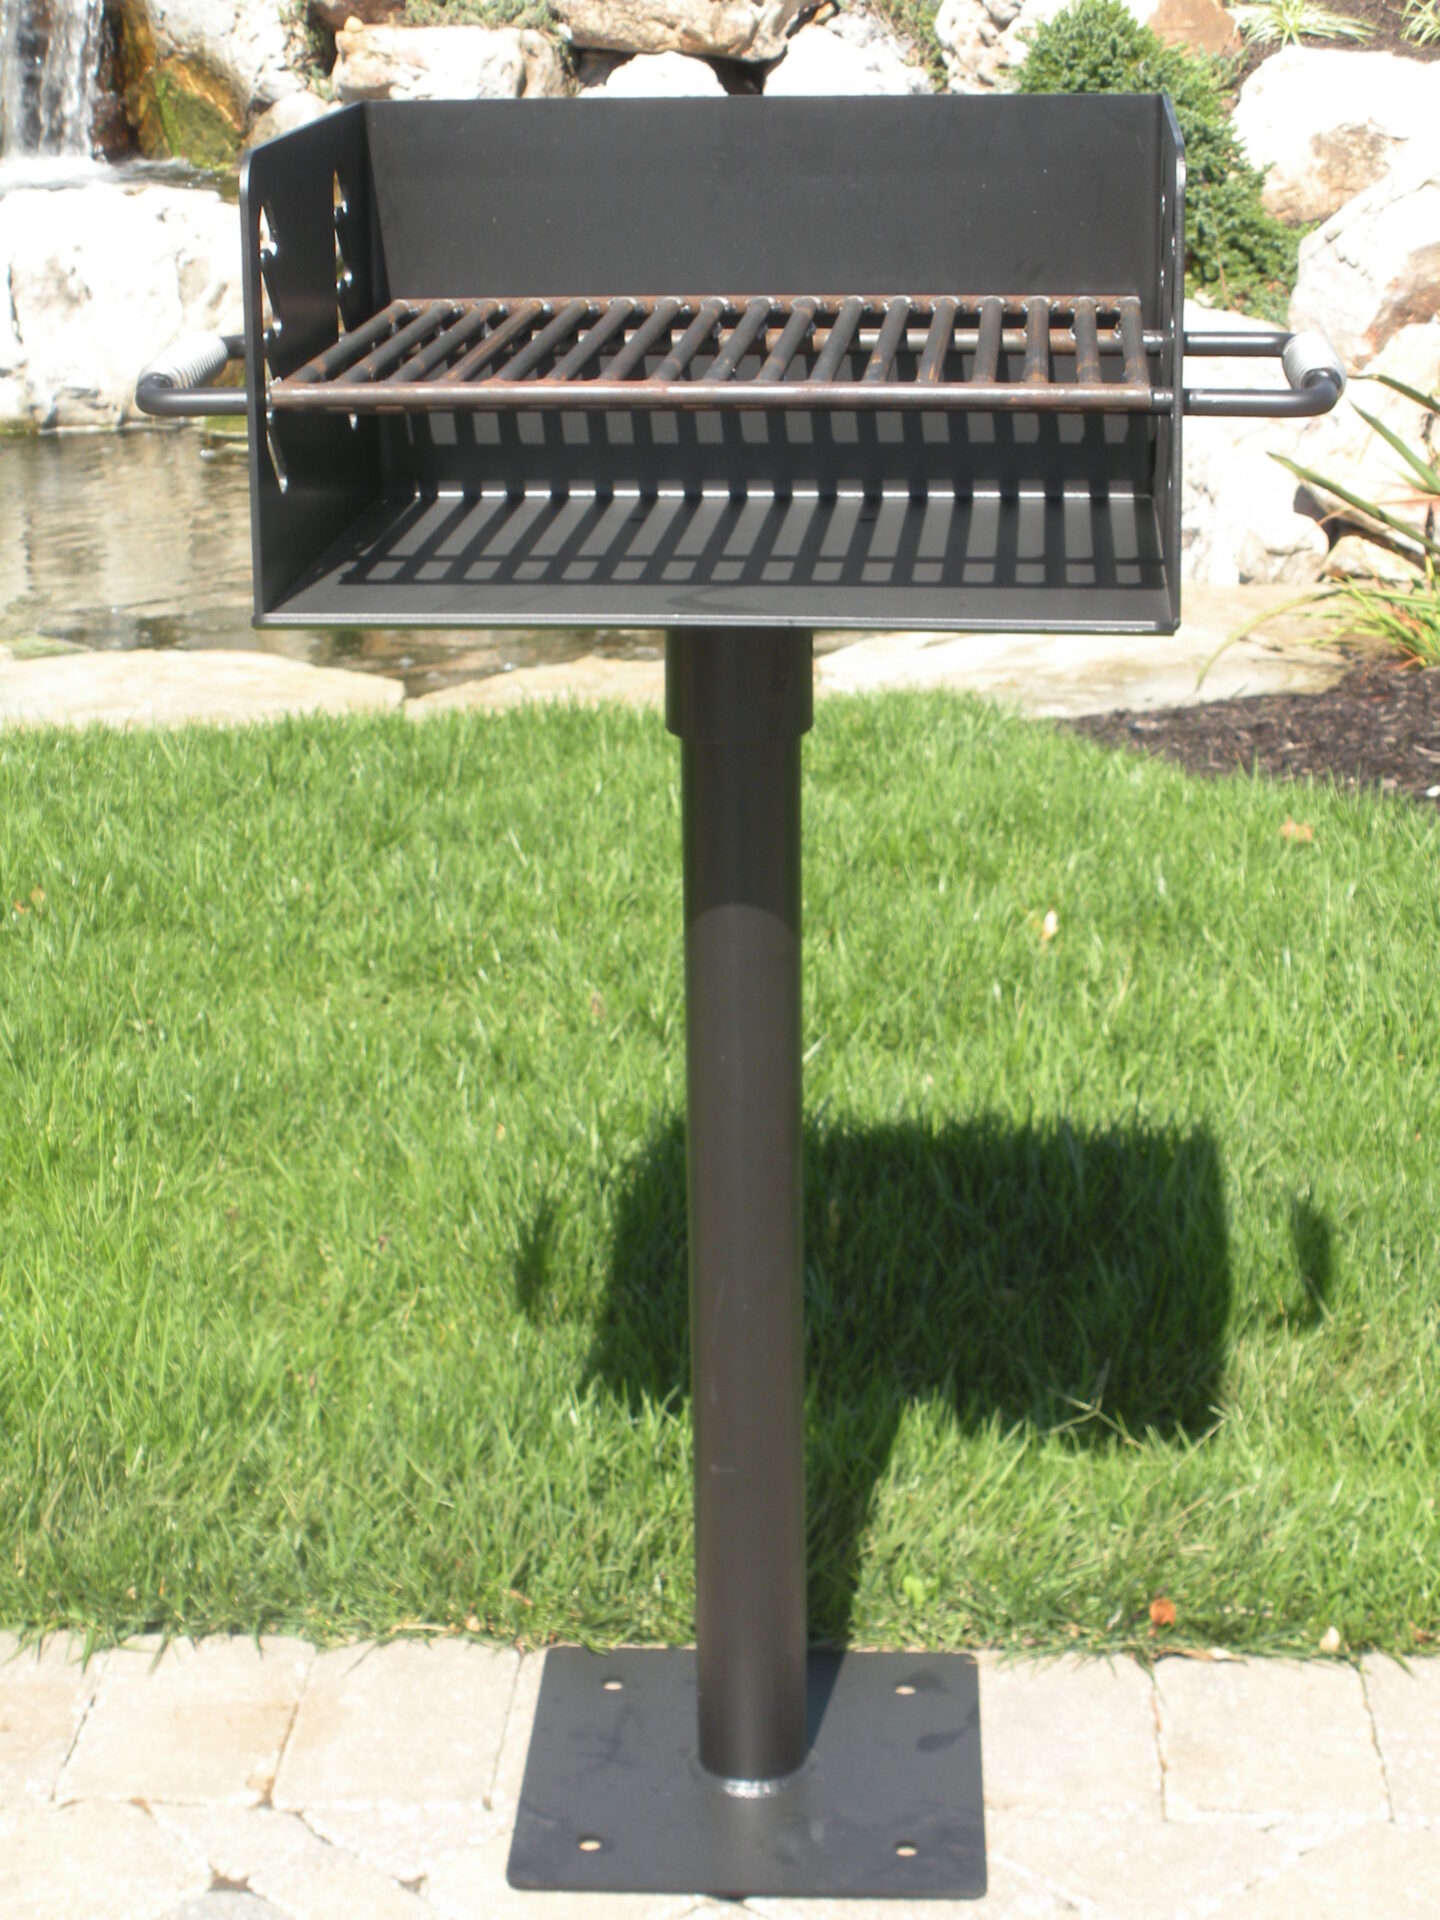 Park Grill American Barbecue Systems